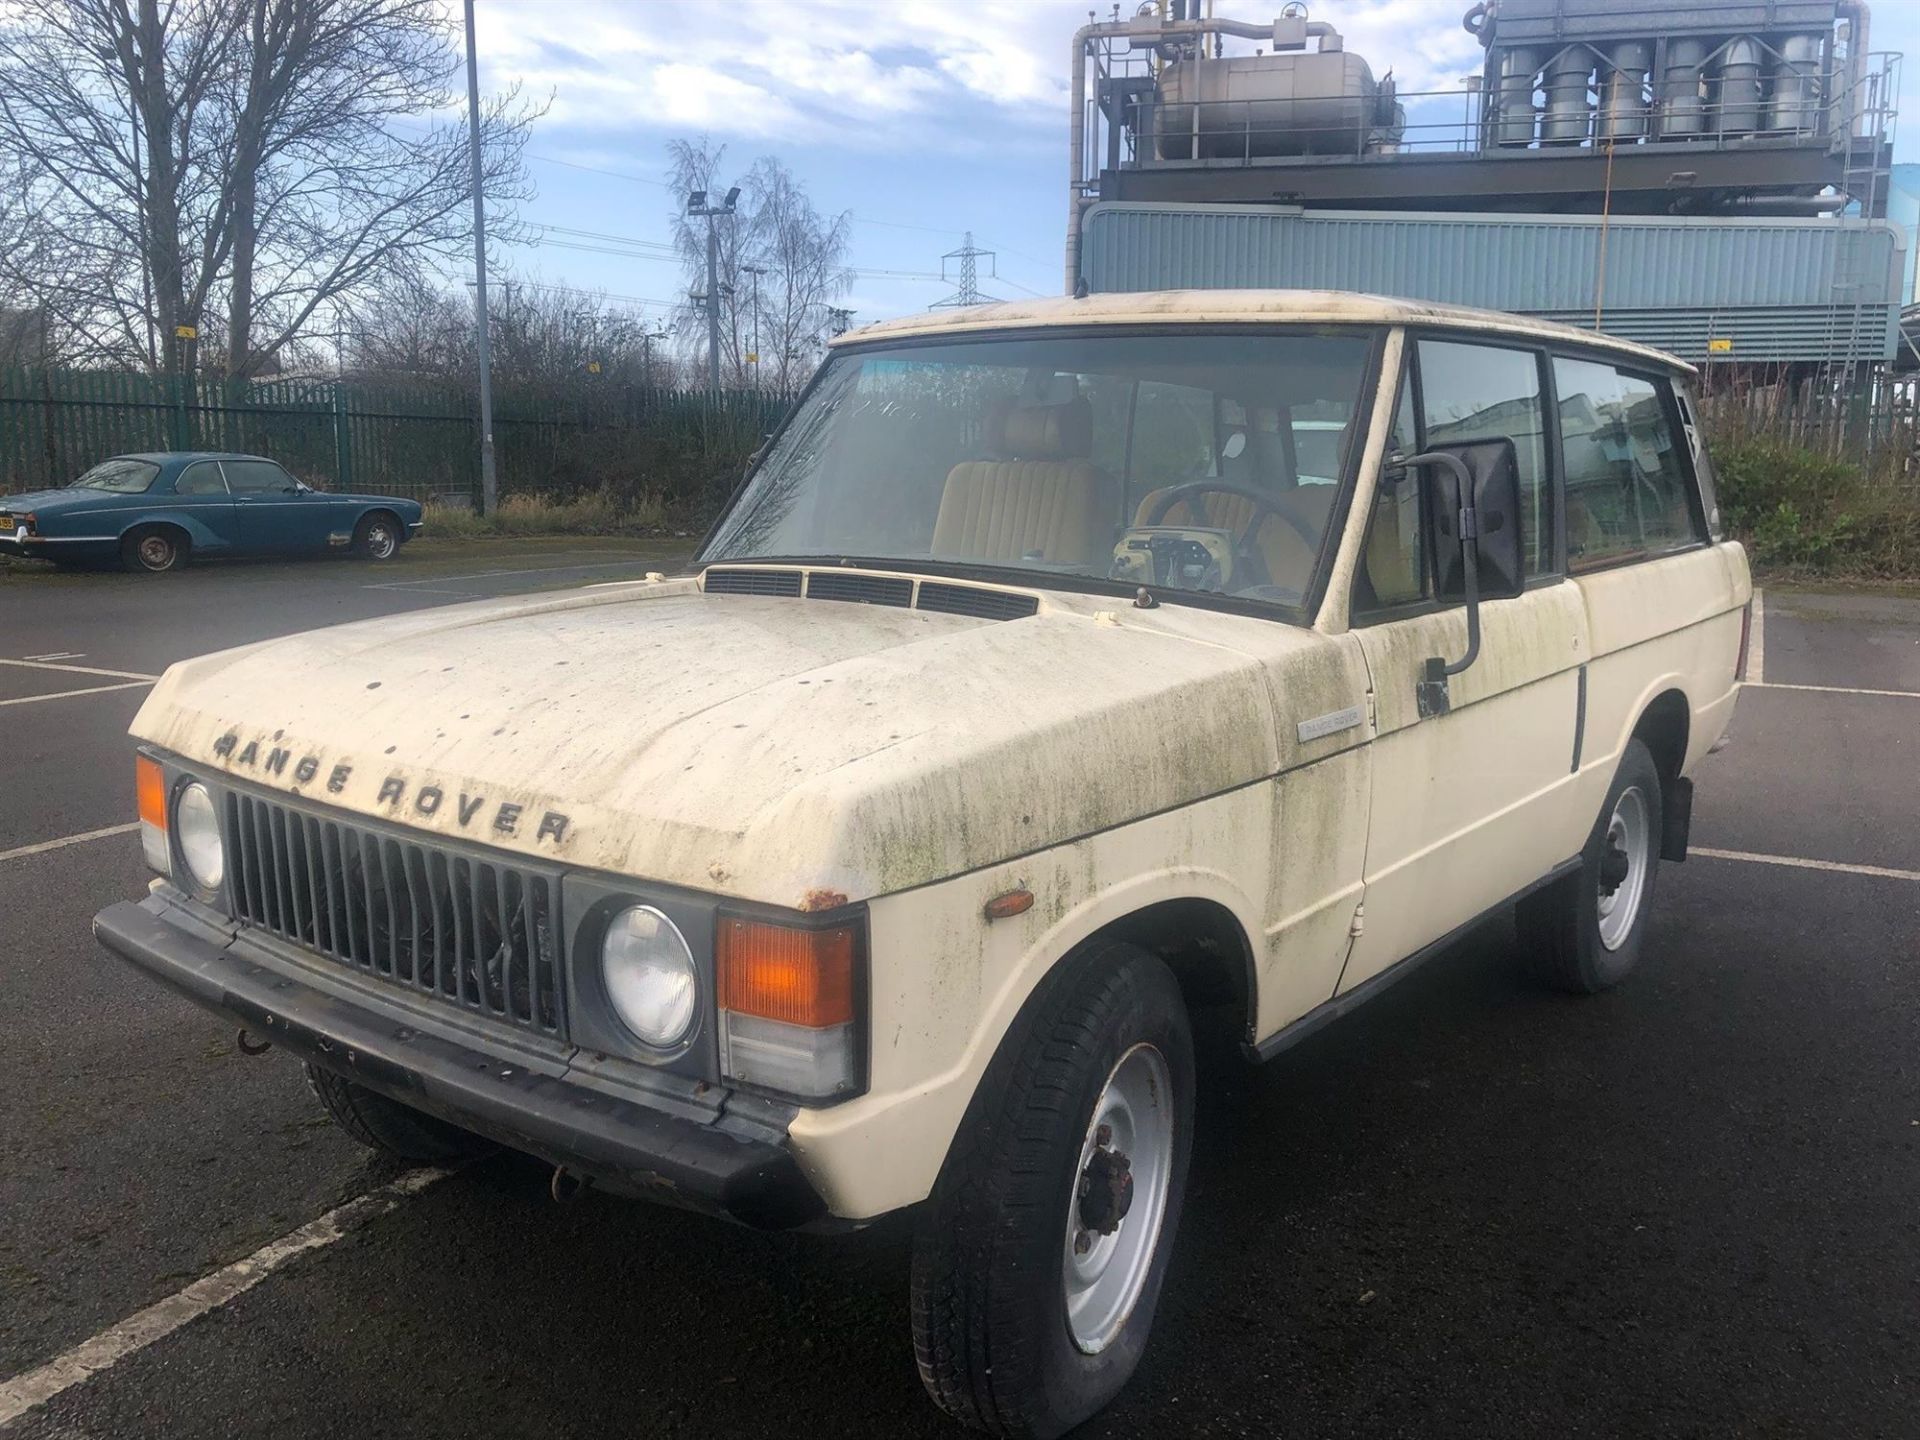 1976 Range Rover Classic 'Suffix D' - Image 2 of 4